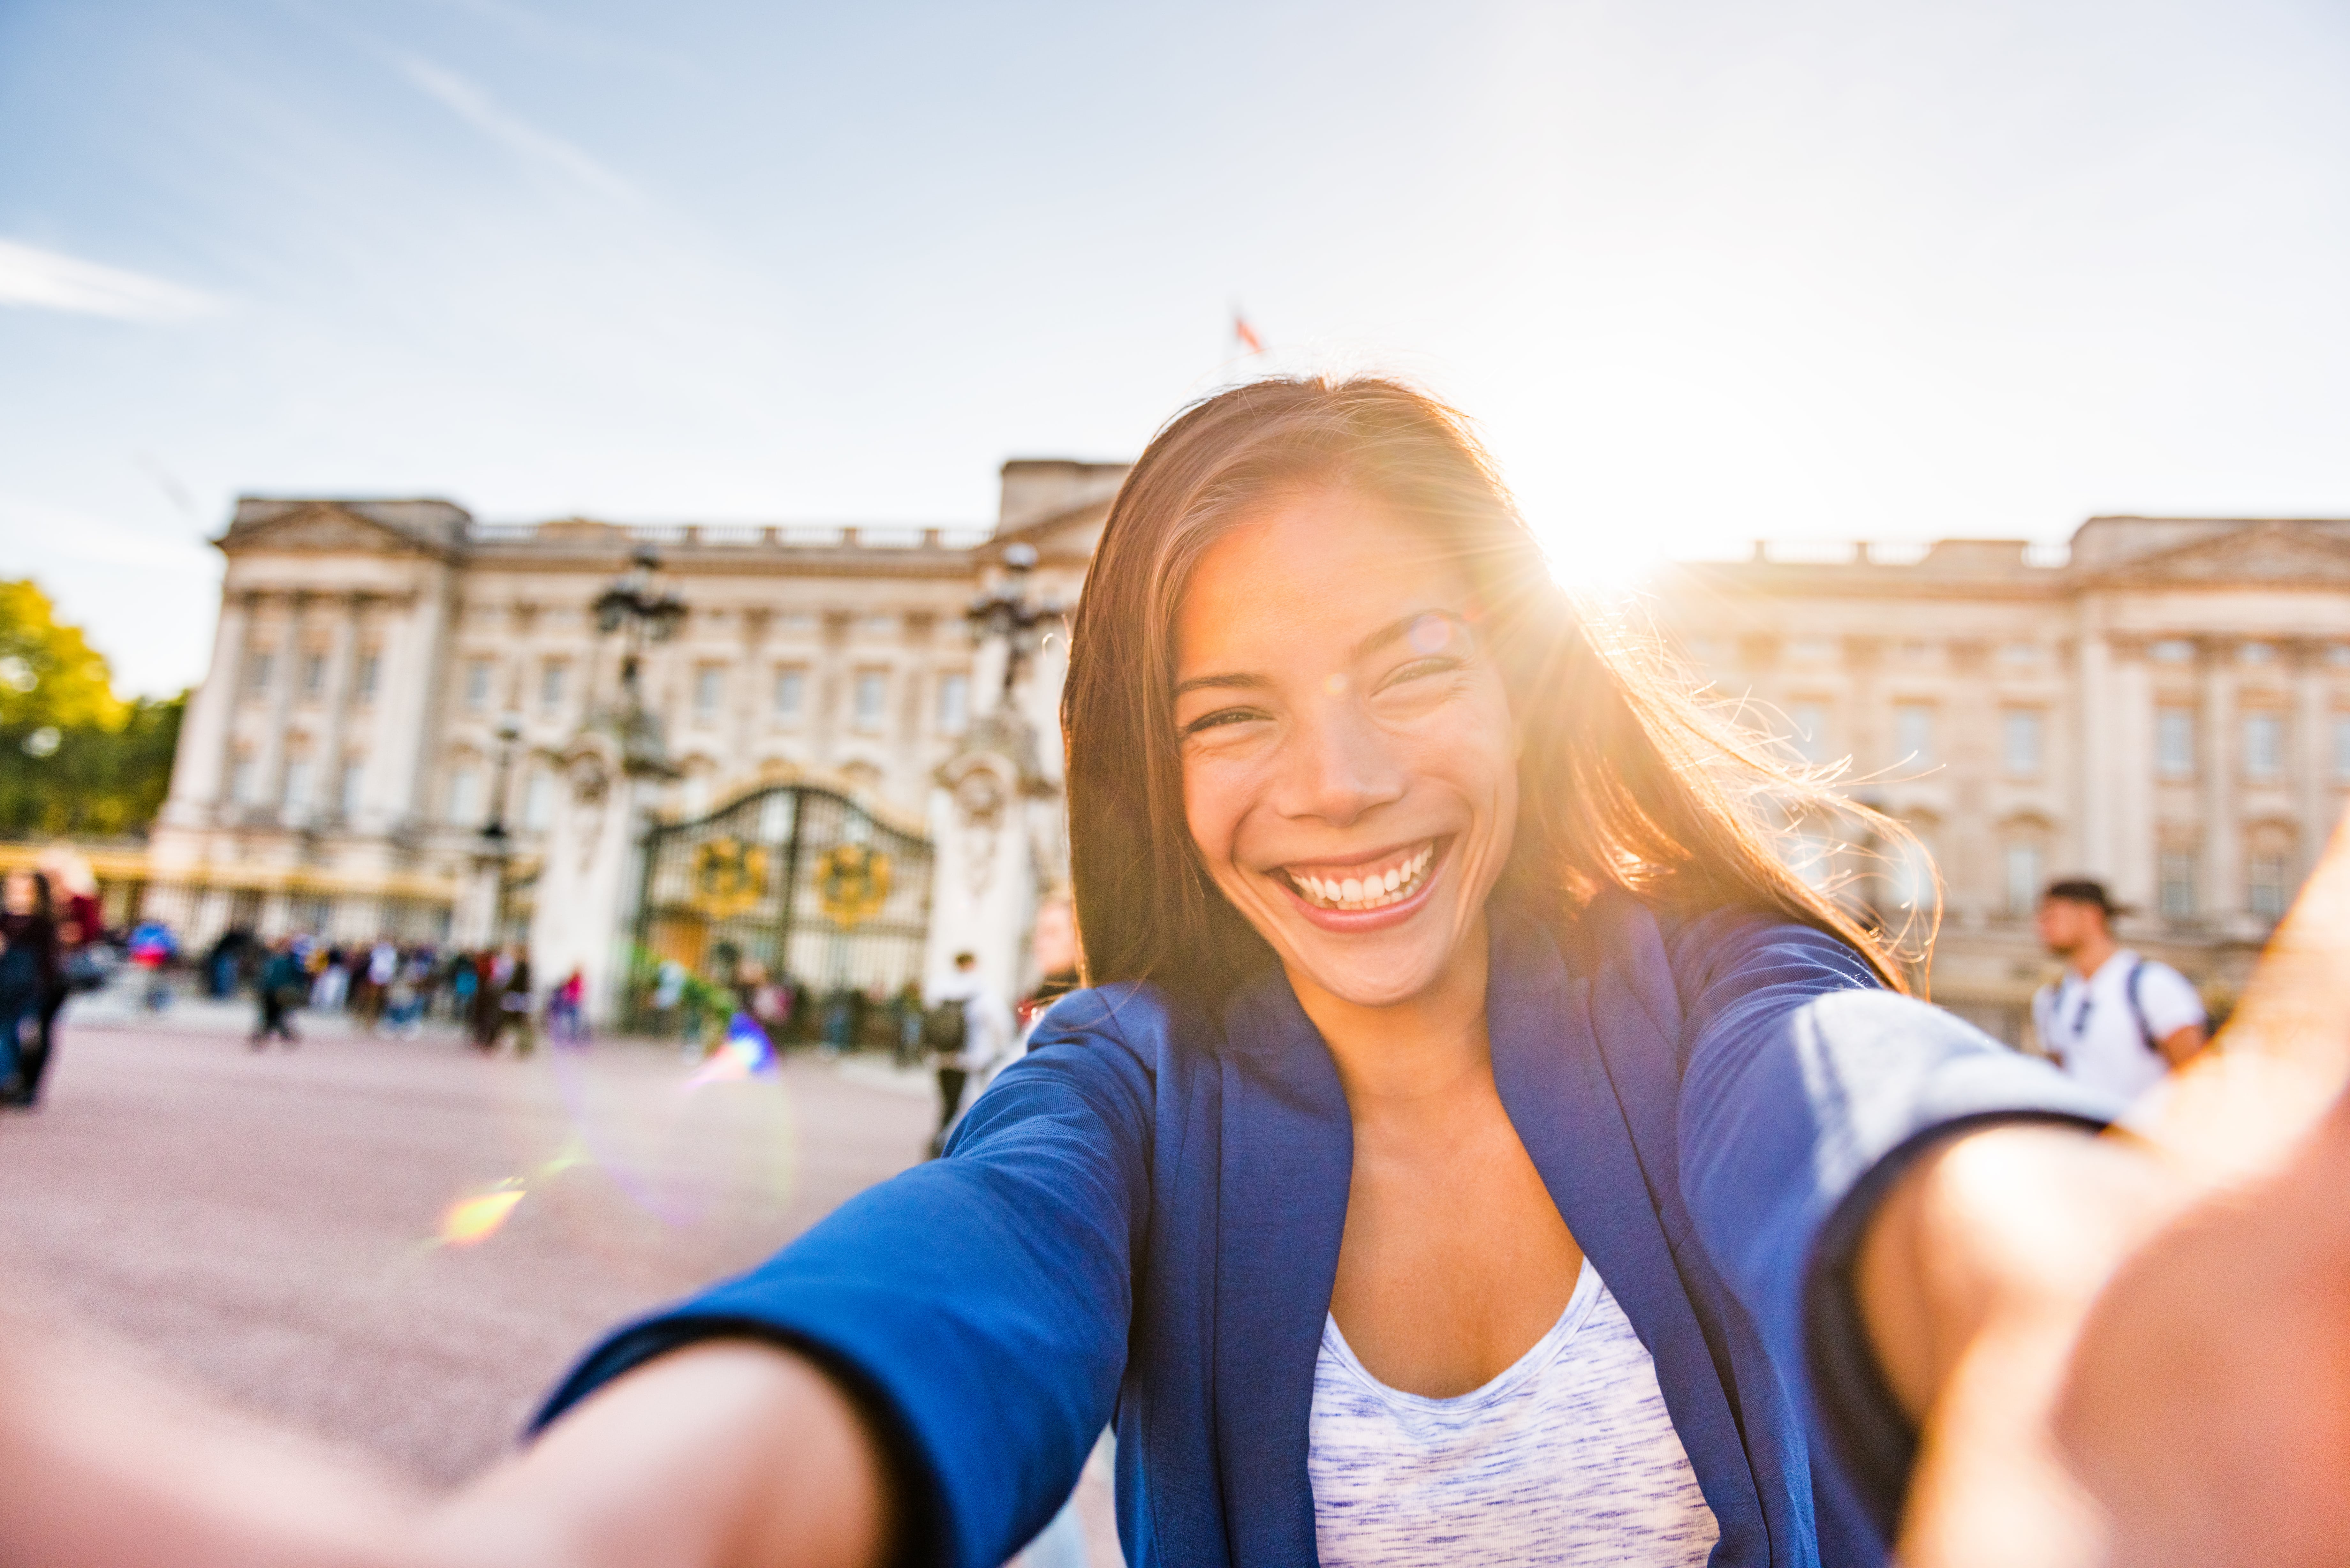 Vlogger taking selfie in front of Buckingham Palace